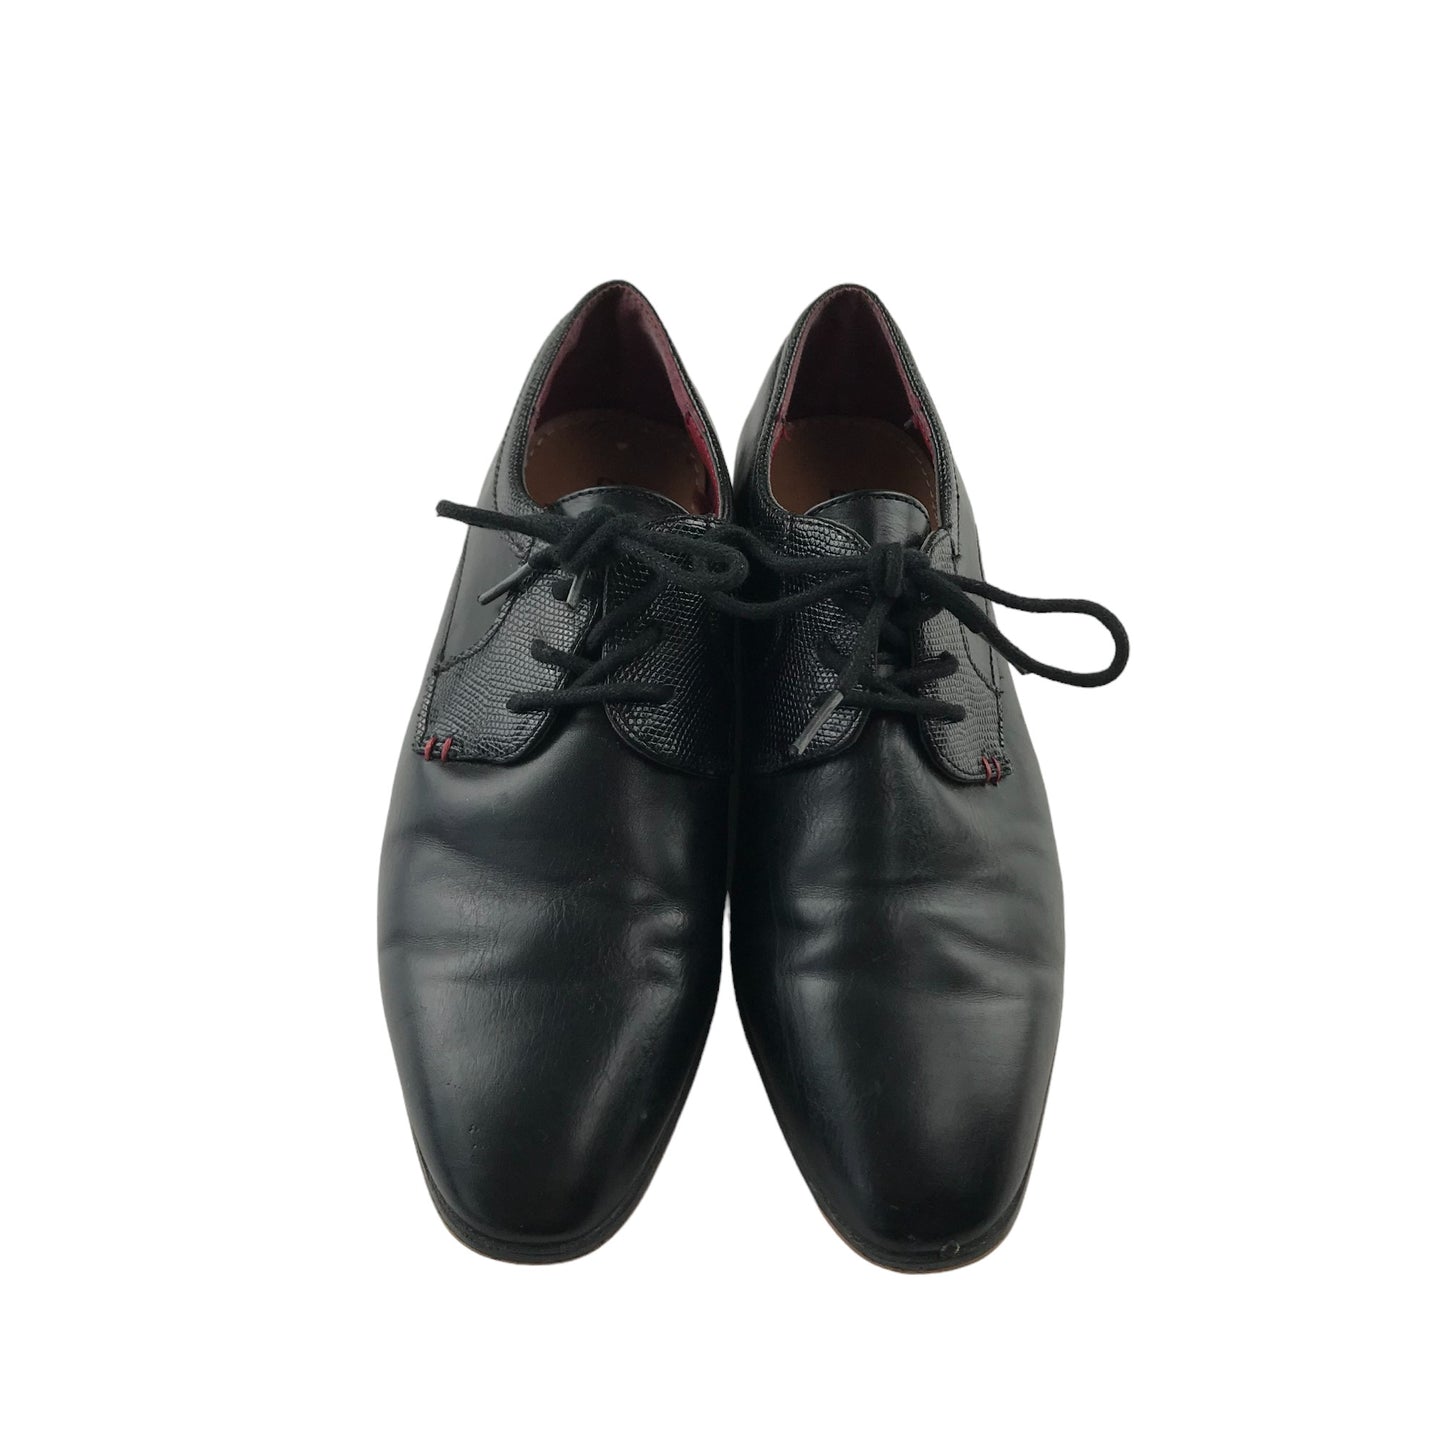 River Island Oxford Shoe Size 2 Black Leather Style with Laces